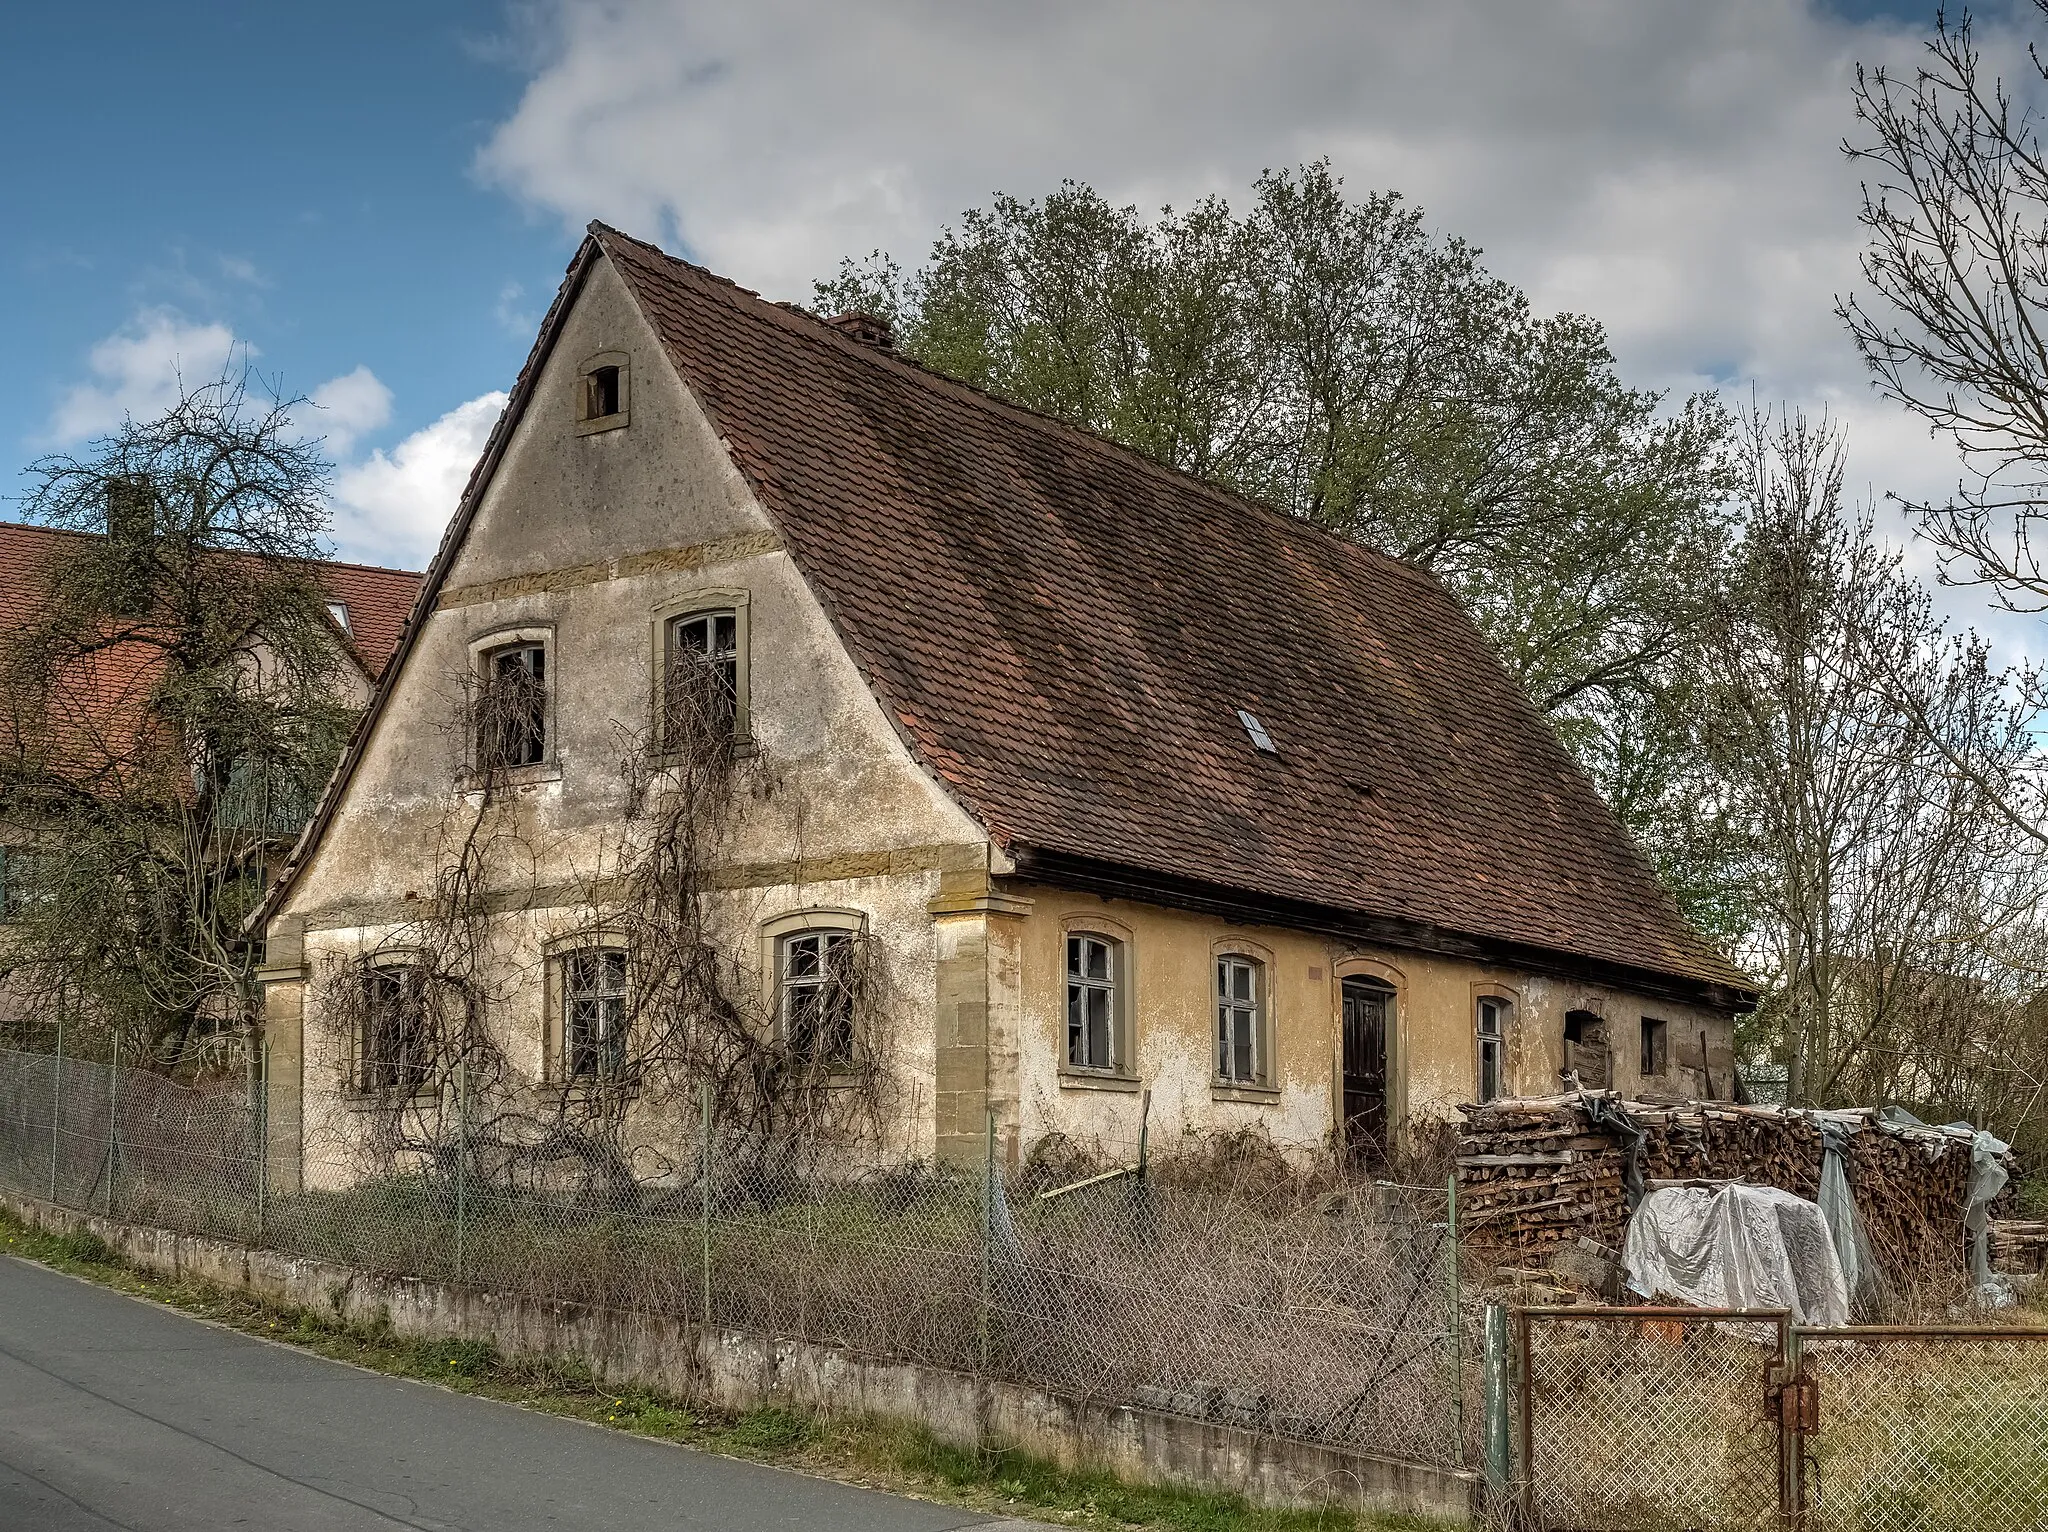 Photo showing: Dilapidated house in Hallerndorf near Forchheim